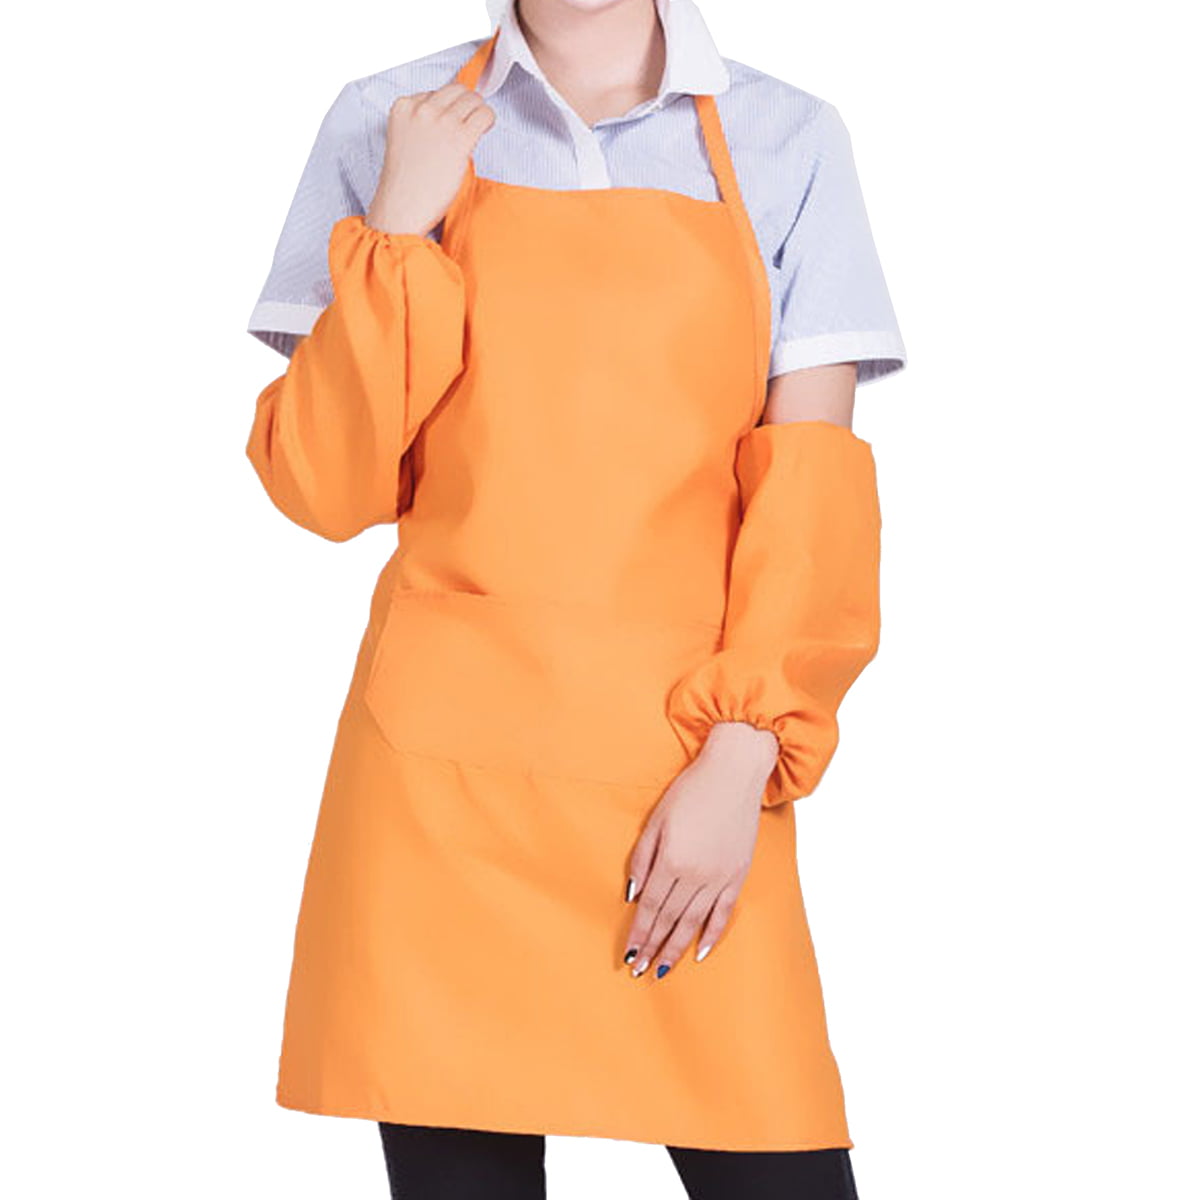 LADIES WOMEN TABARD APRON OVERALL KITCHEN CATERING CLEANING POCKET COLOR YELLOW 